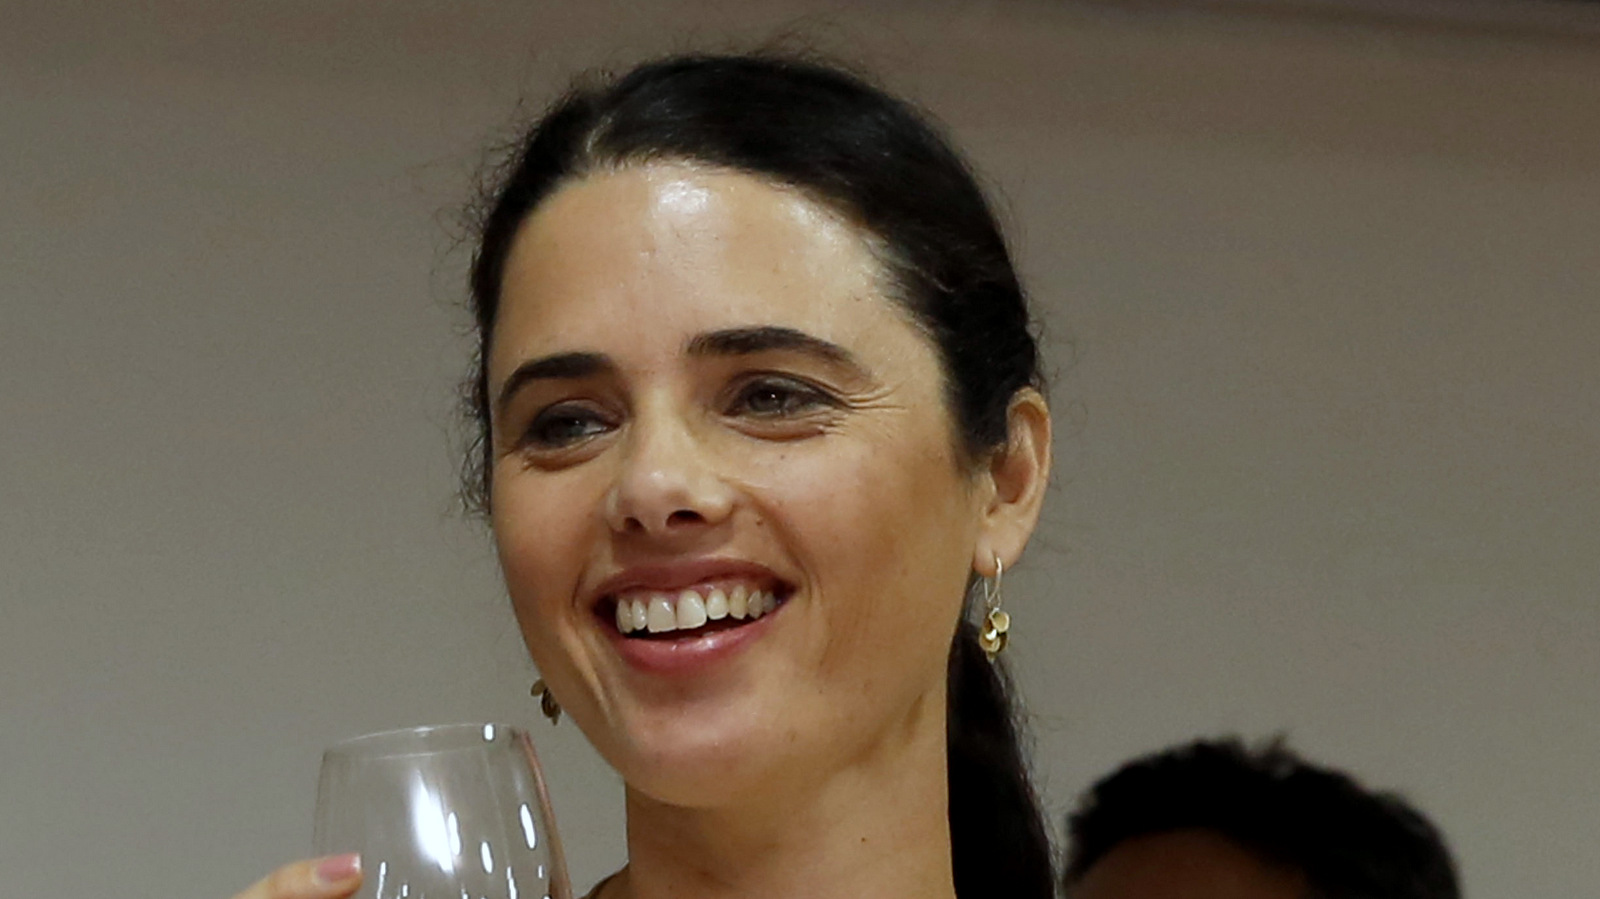 Israel's Justice Minister, Ayelet Shaked, who famously stated: "This is a war against two people, not a war on terror, Israel must slaughter all Palestinian mothers who give birth to “little snakes."